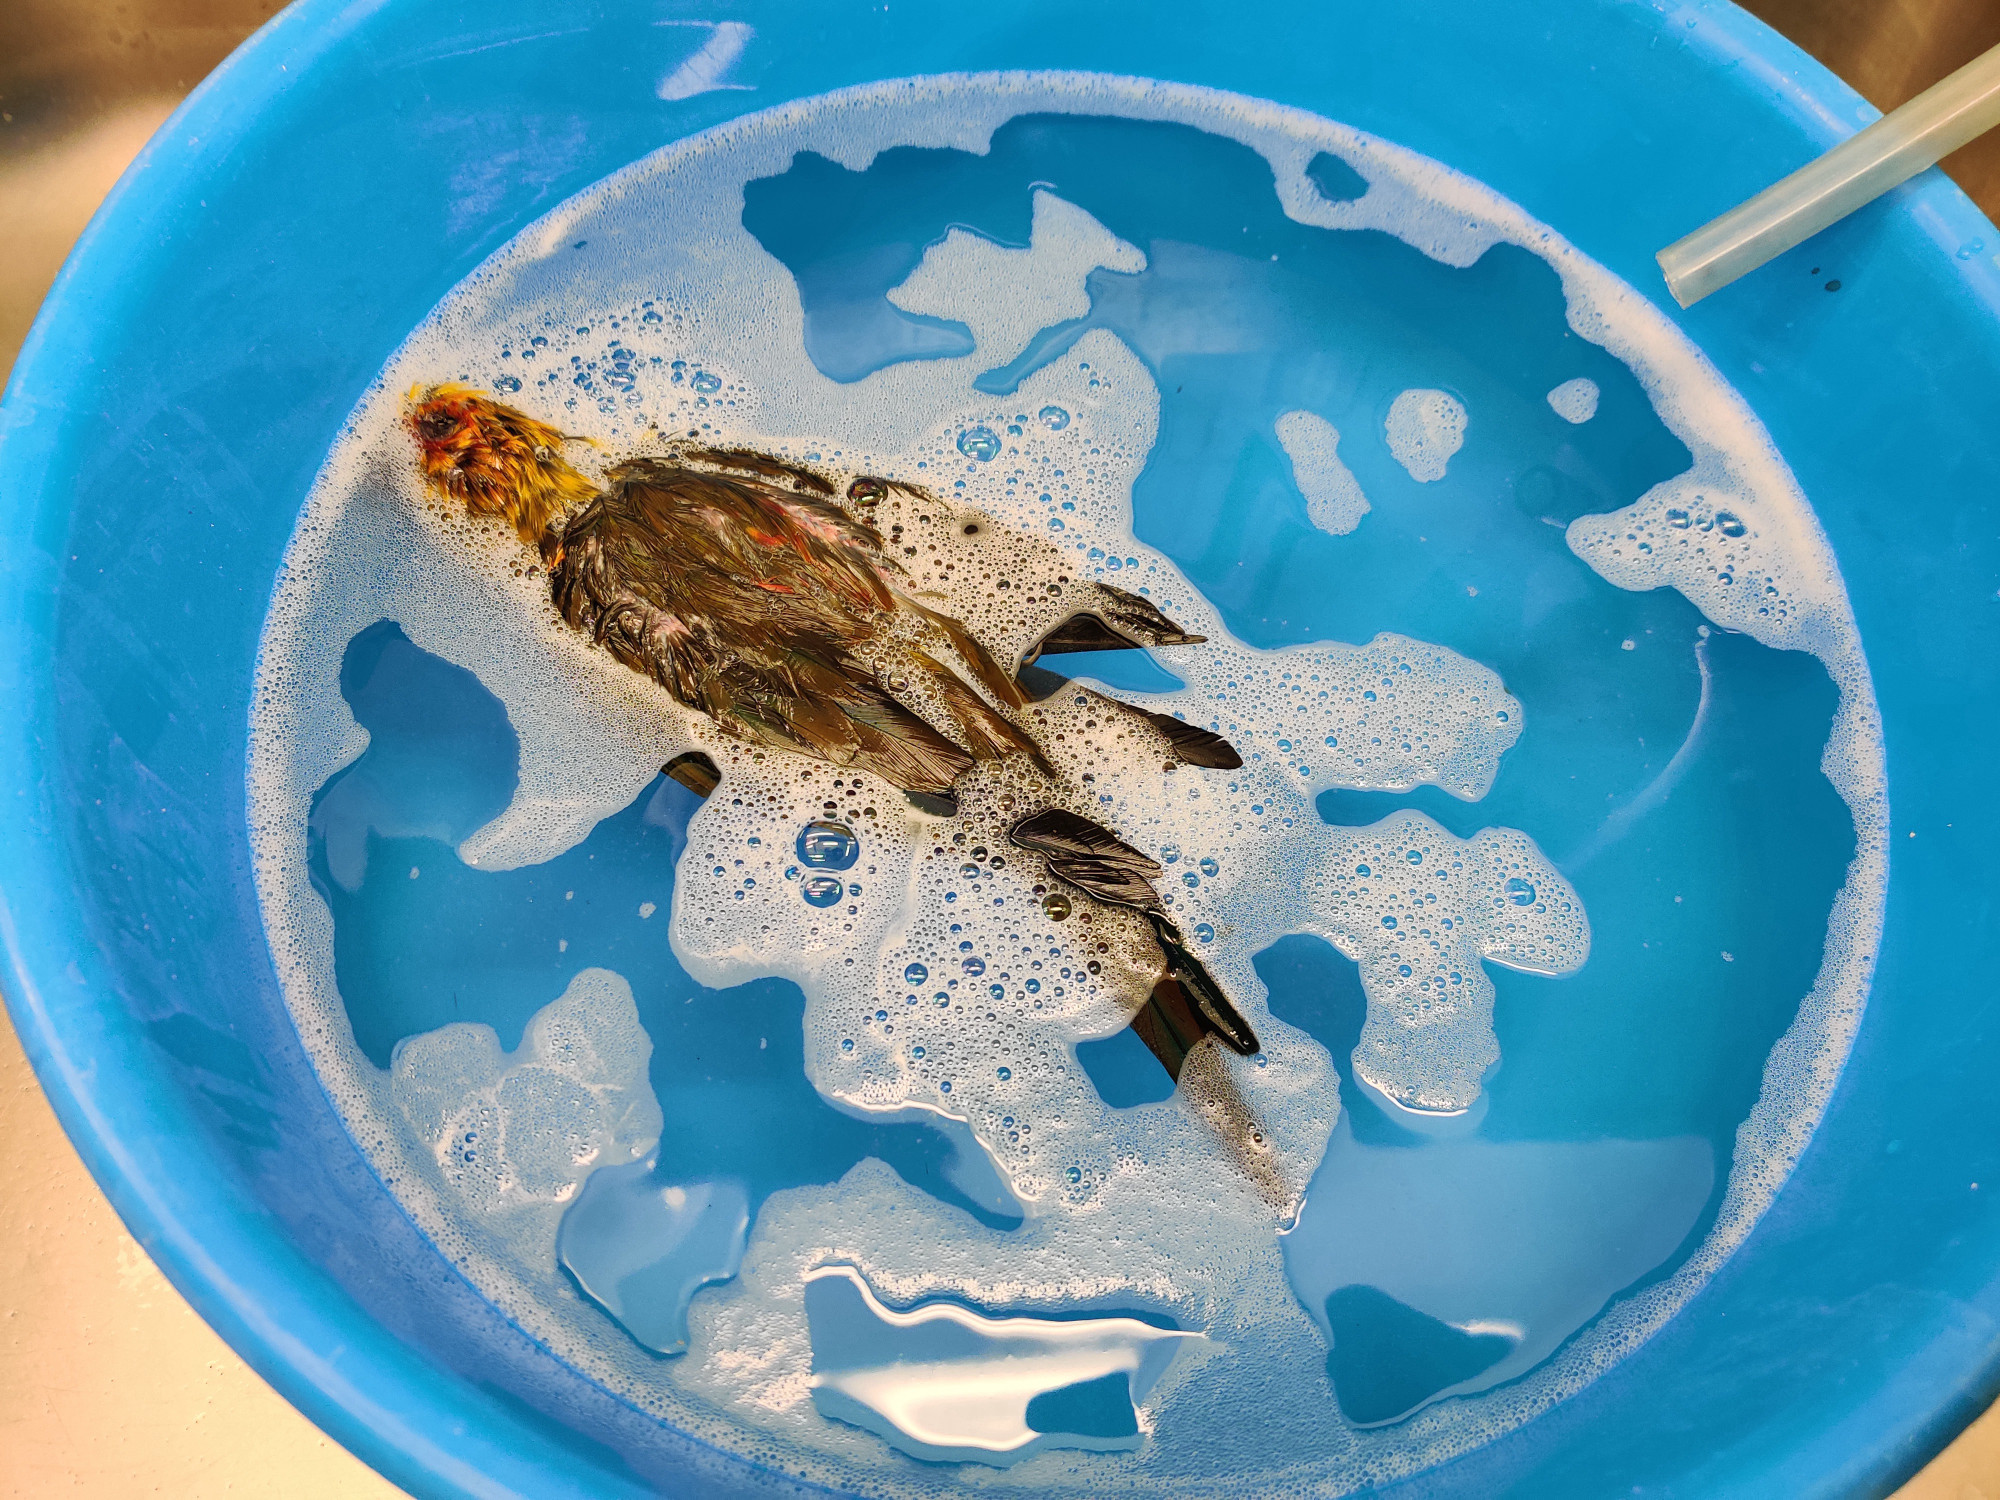 Close-up of a blue bowl, half-filled with a transparent liquid in which the body of a dead bird floats. There is some white foam on the surface of the water. A thin rubber hose protrudes into the bowl from the right, without touching the water.